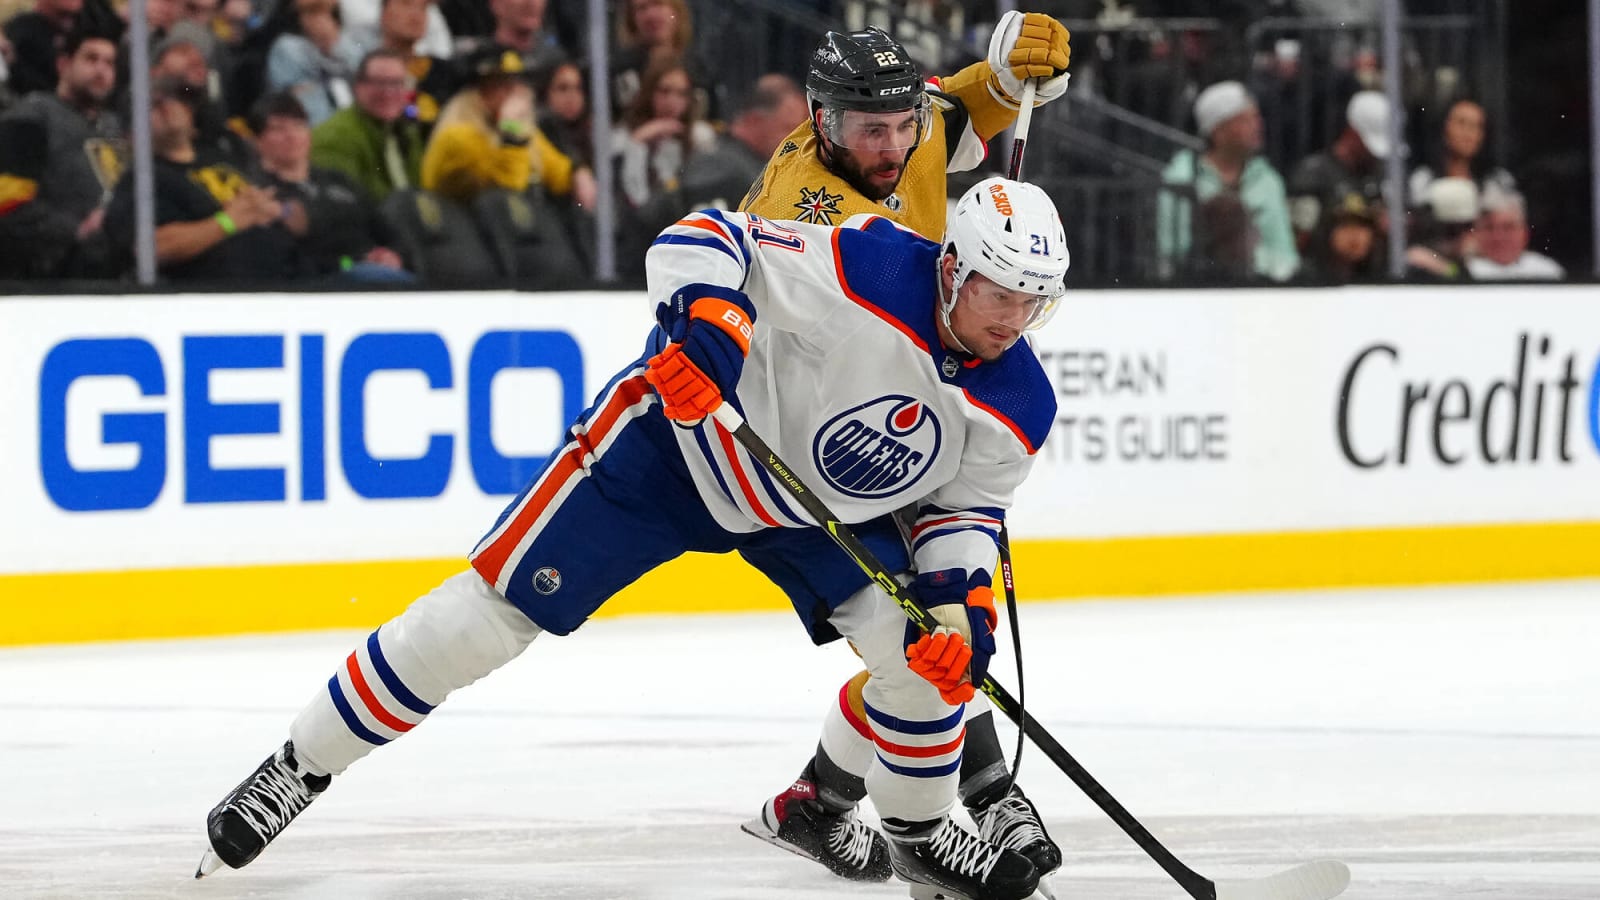 Former Oiler Klim Kostin attends Game 1 against L.A. Kings, receives ovation from fans